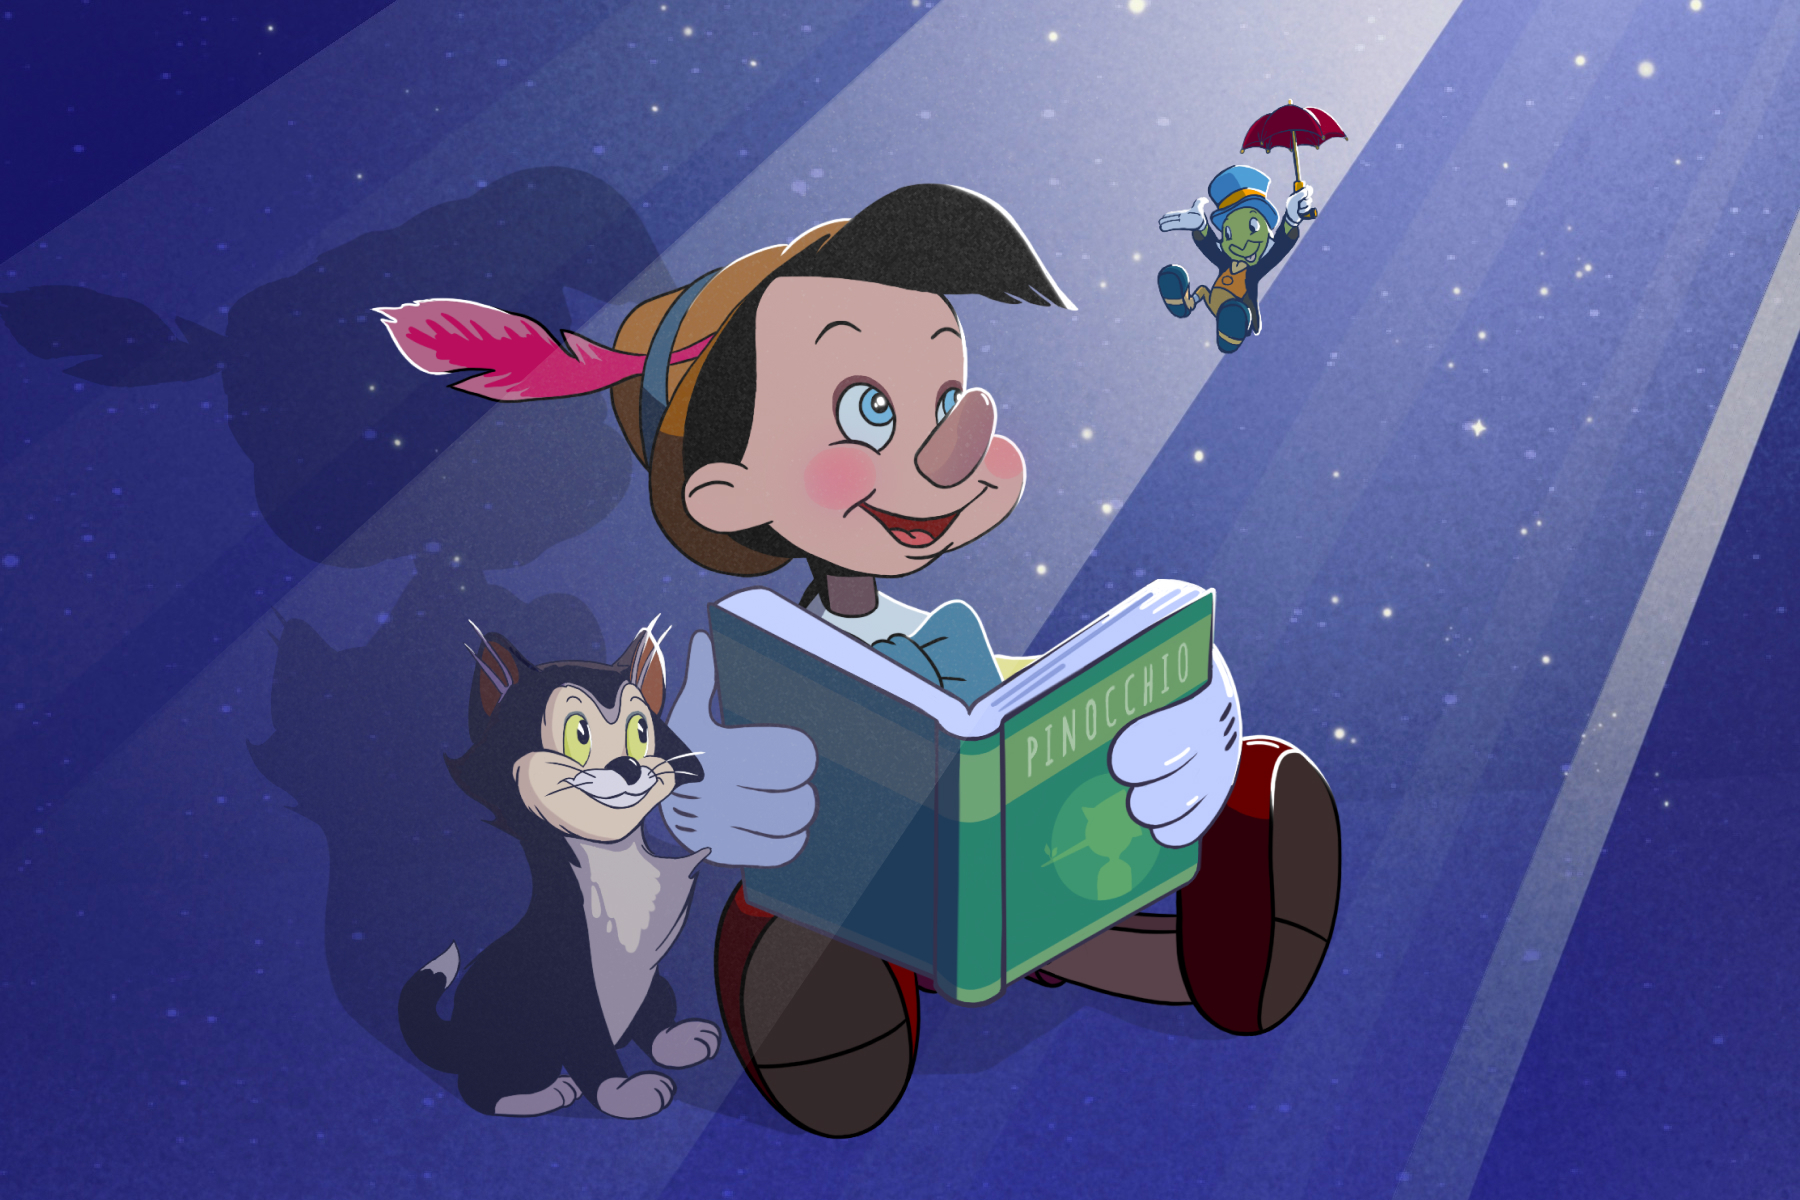 The Story of Pinocchio Still Resonates, Even Nearly 140 Years Later